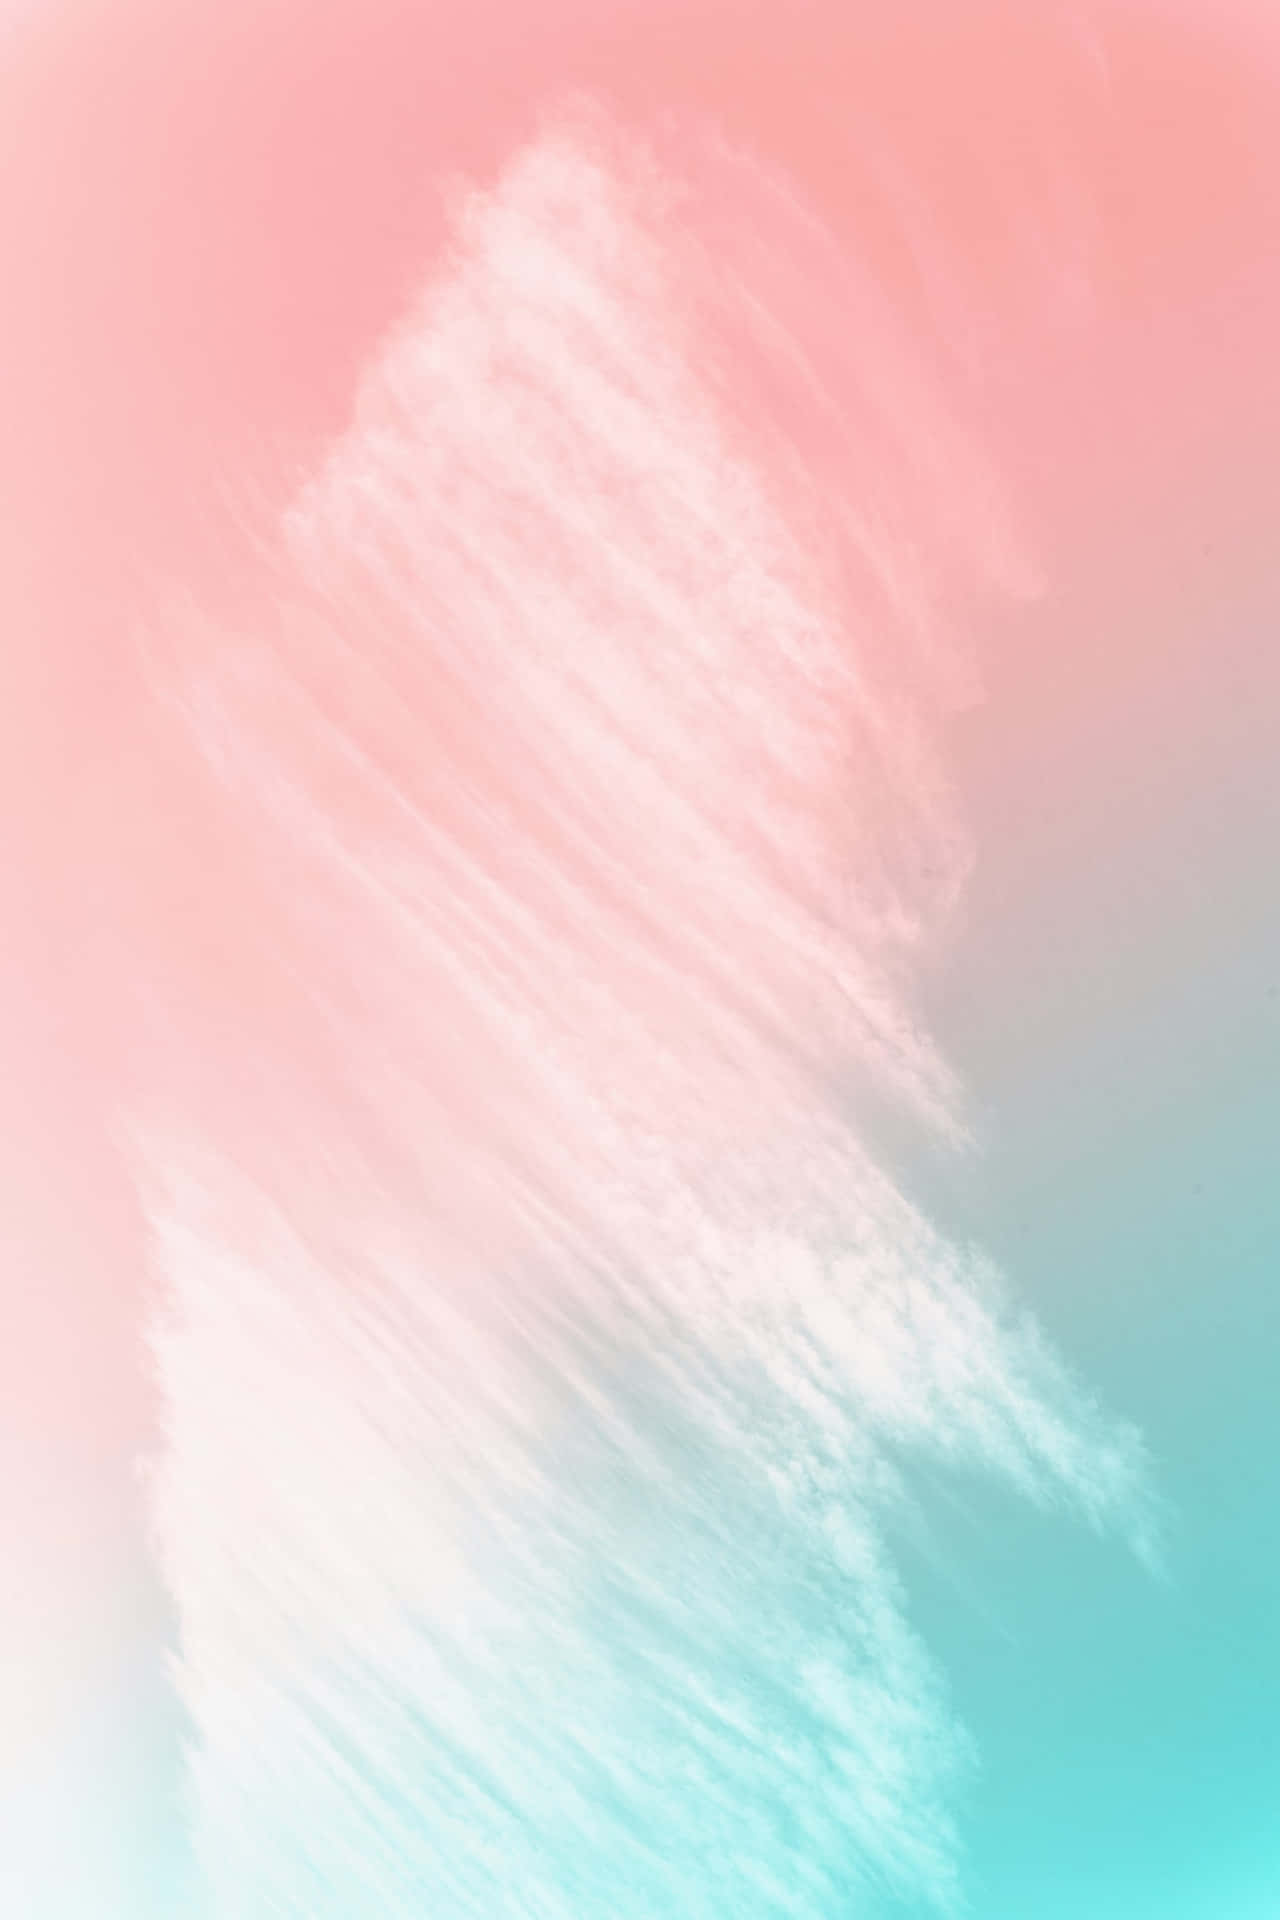 Take a Moment to Appreciate the Serene Beauty of a Colorful Pastel Aesthetic. Wallpaper